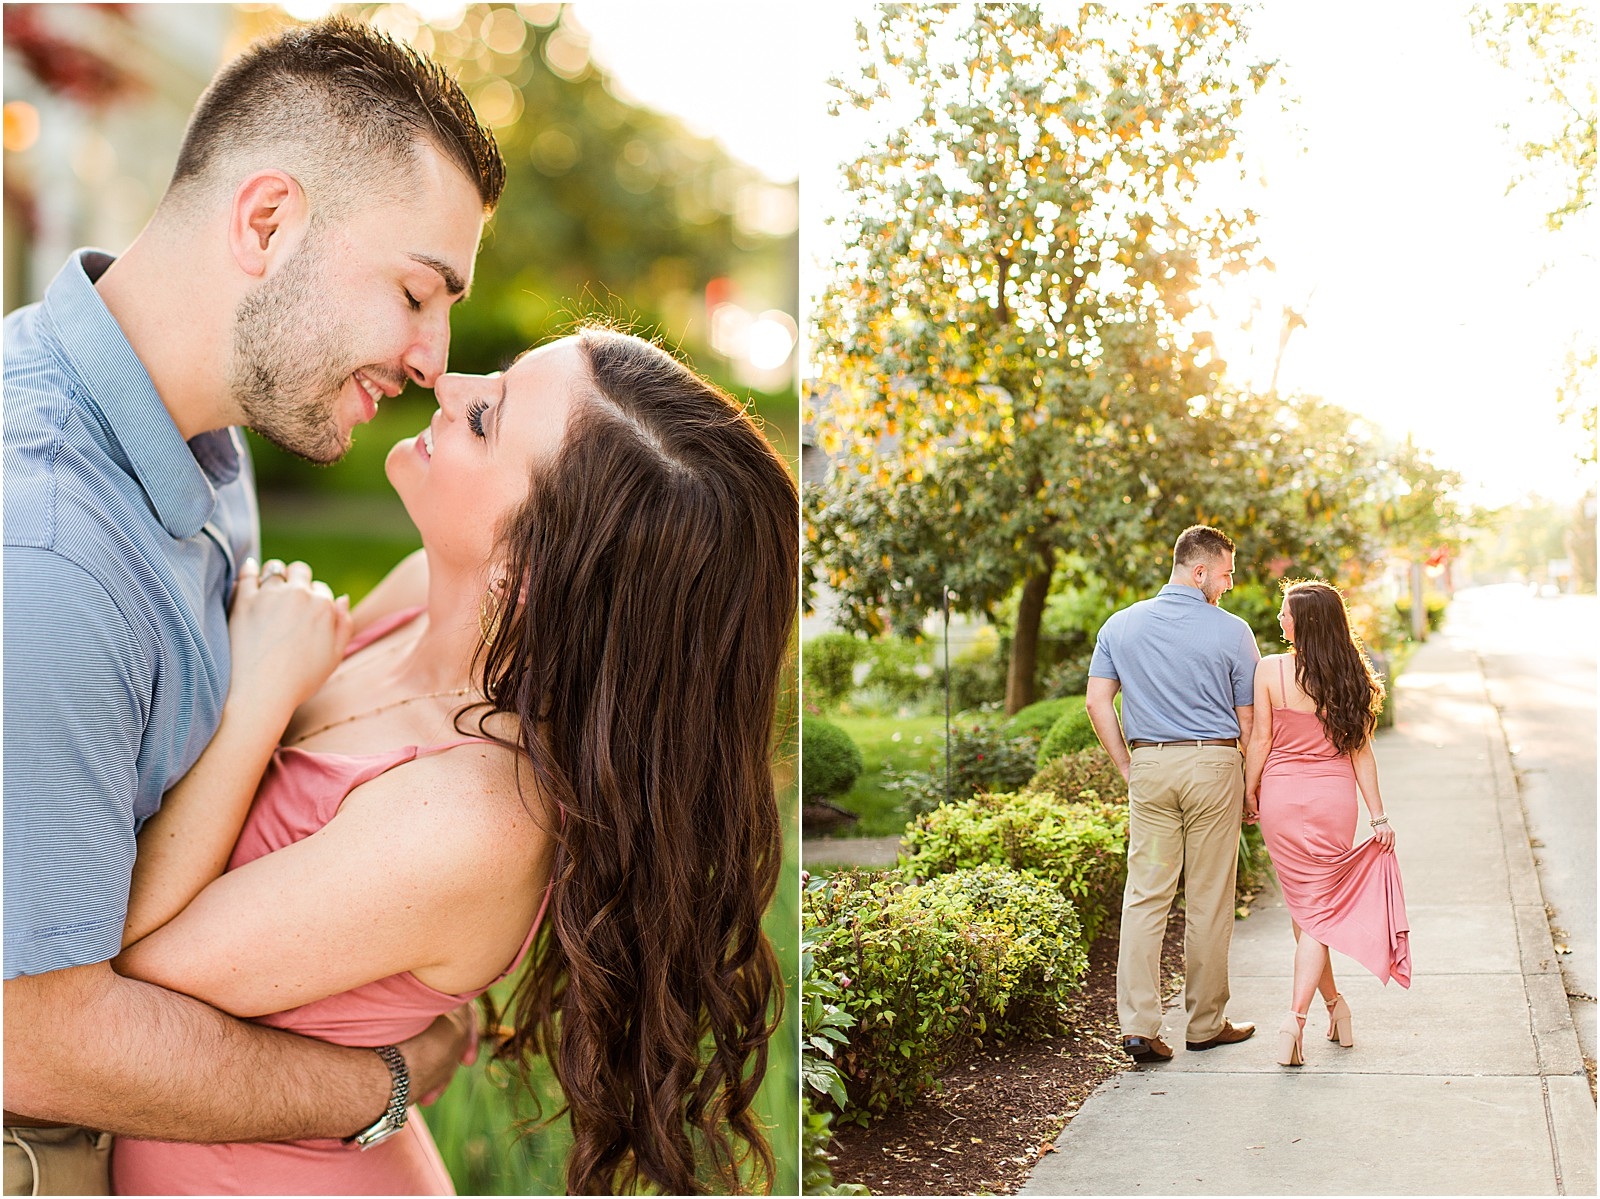 Downtown Newburgh Engagement Session | Matt and Blaire | Bret and Brandie Photography021.jpg